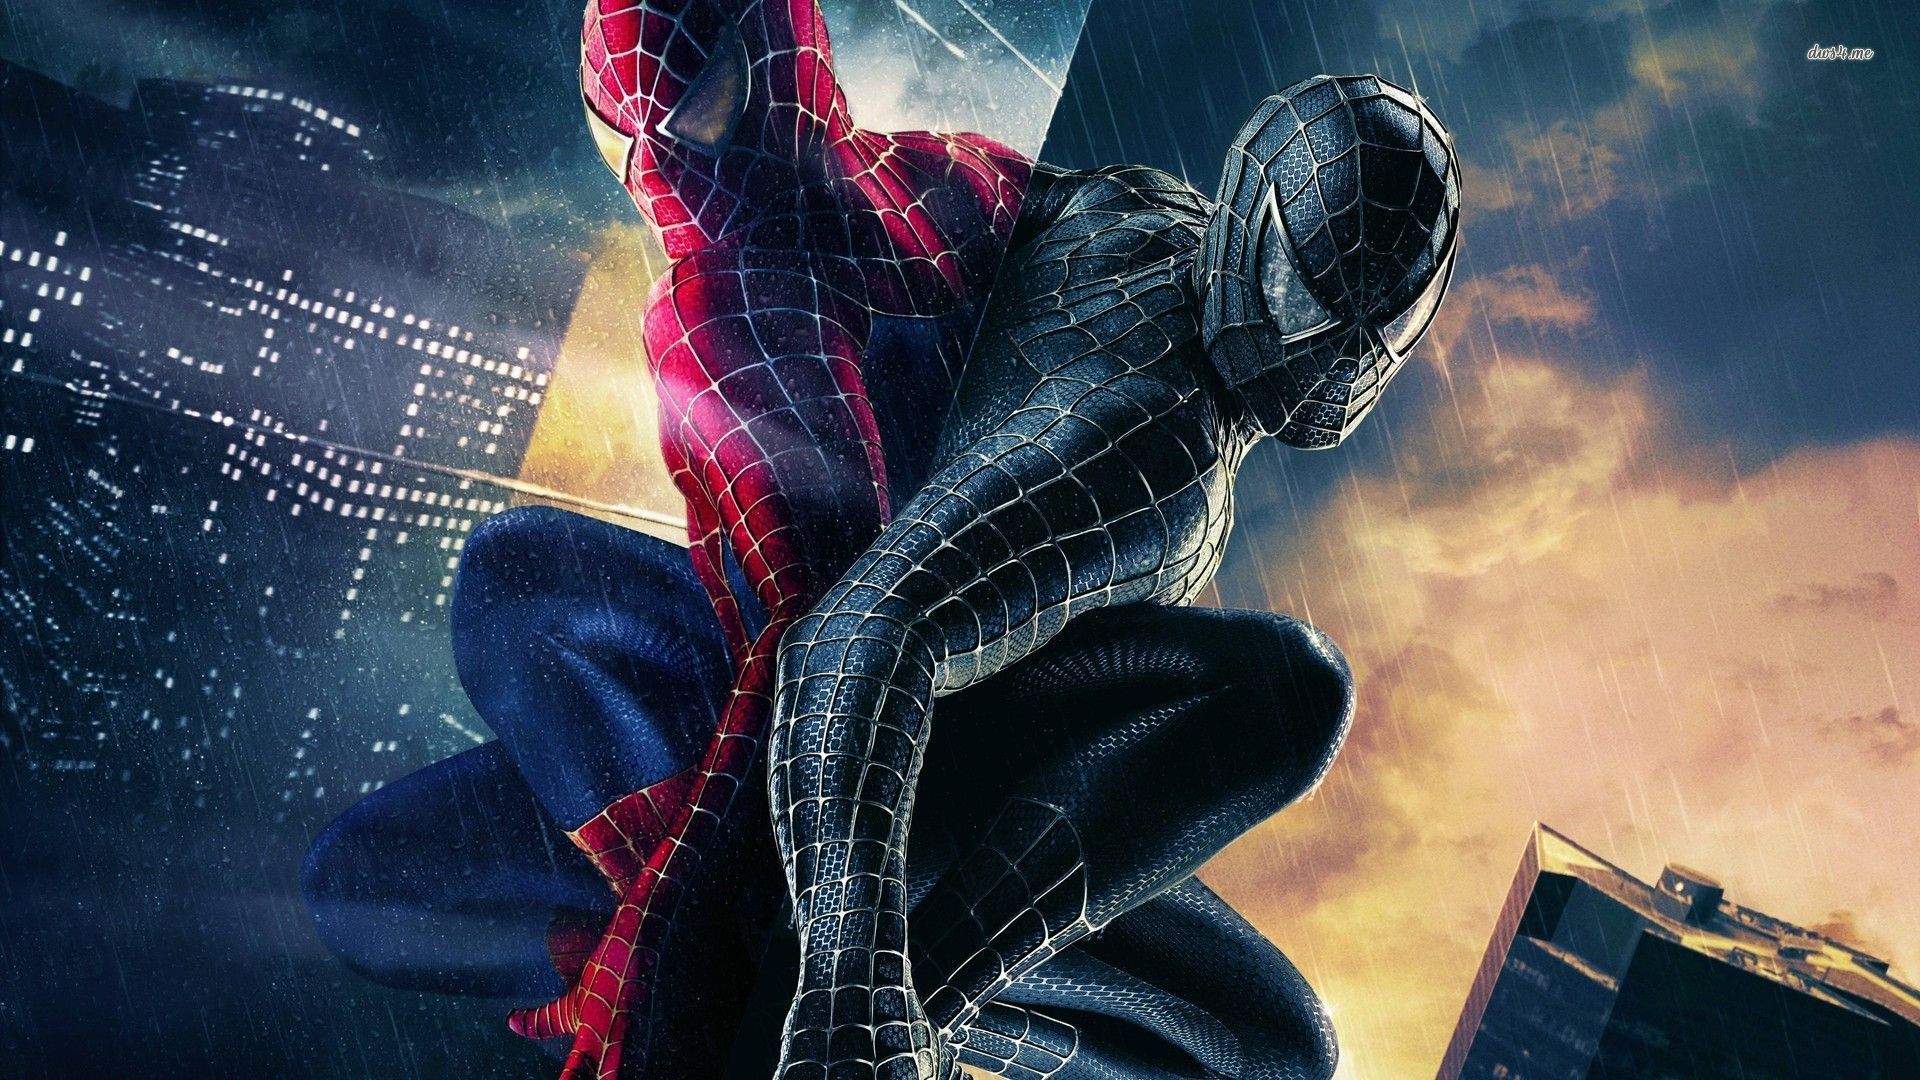 Spider Man 3 hd wallpapers 1920x1080